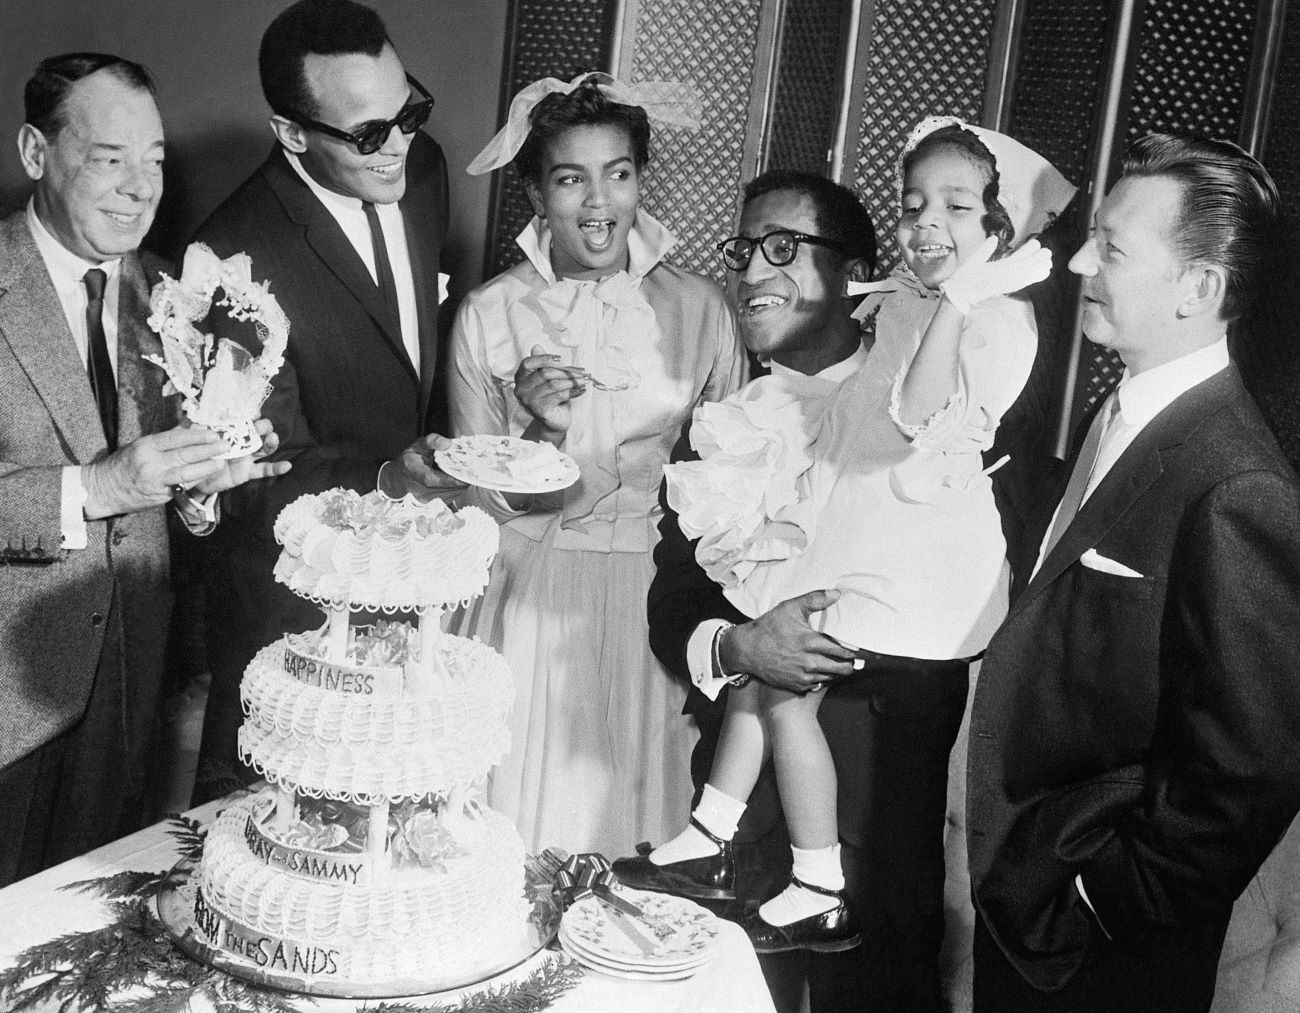 Sammy Davis Jr. on his wedding day with Loray White, holding his sister, Suzette, along with Harry Belafonte, Donald O'Connor, and Joe E. Lewis